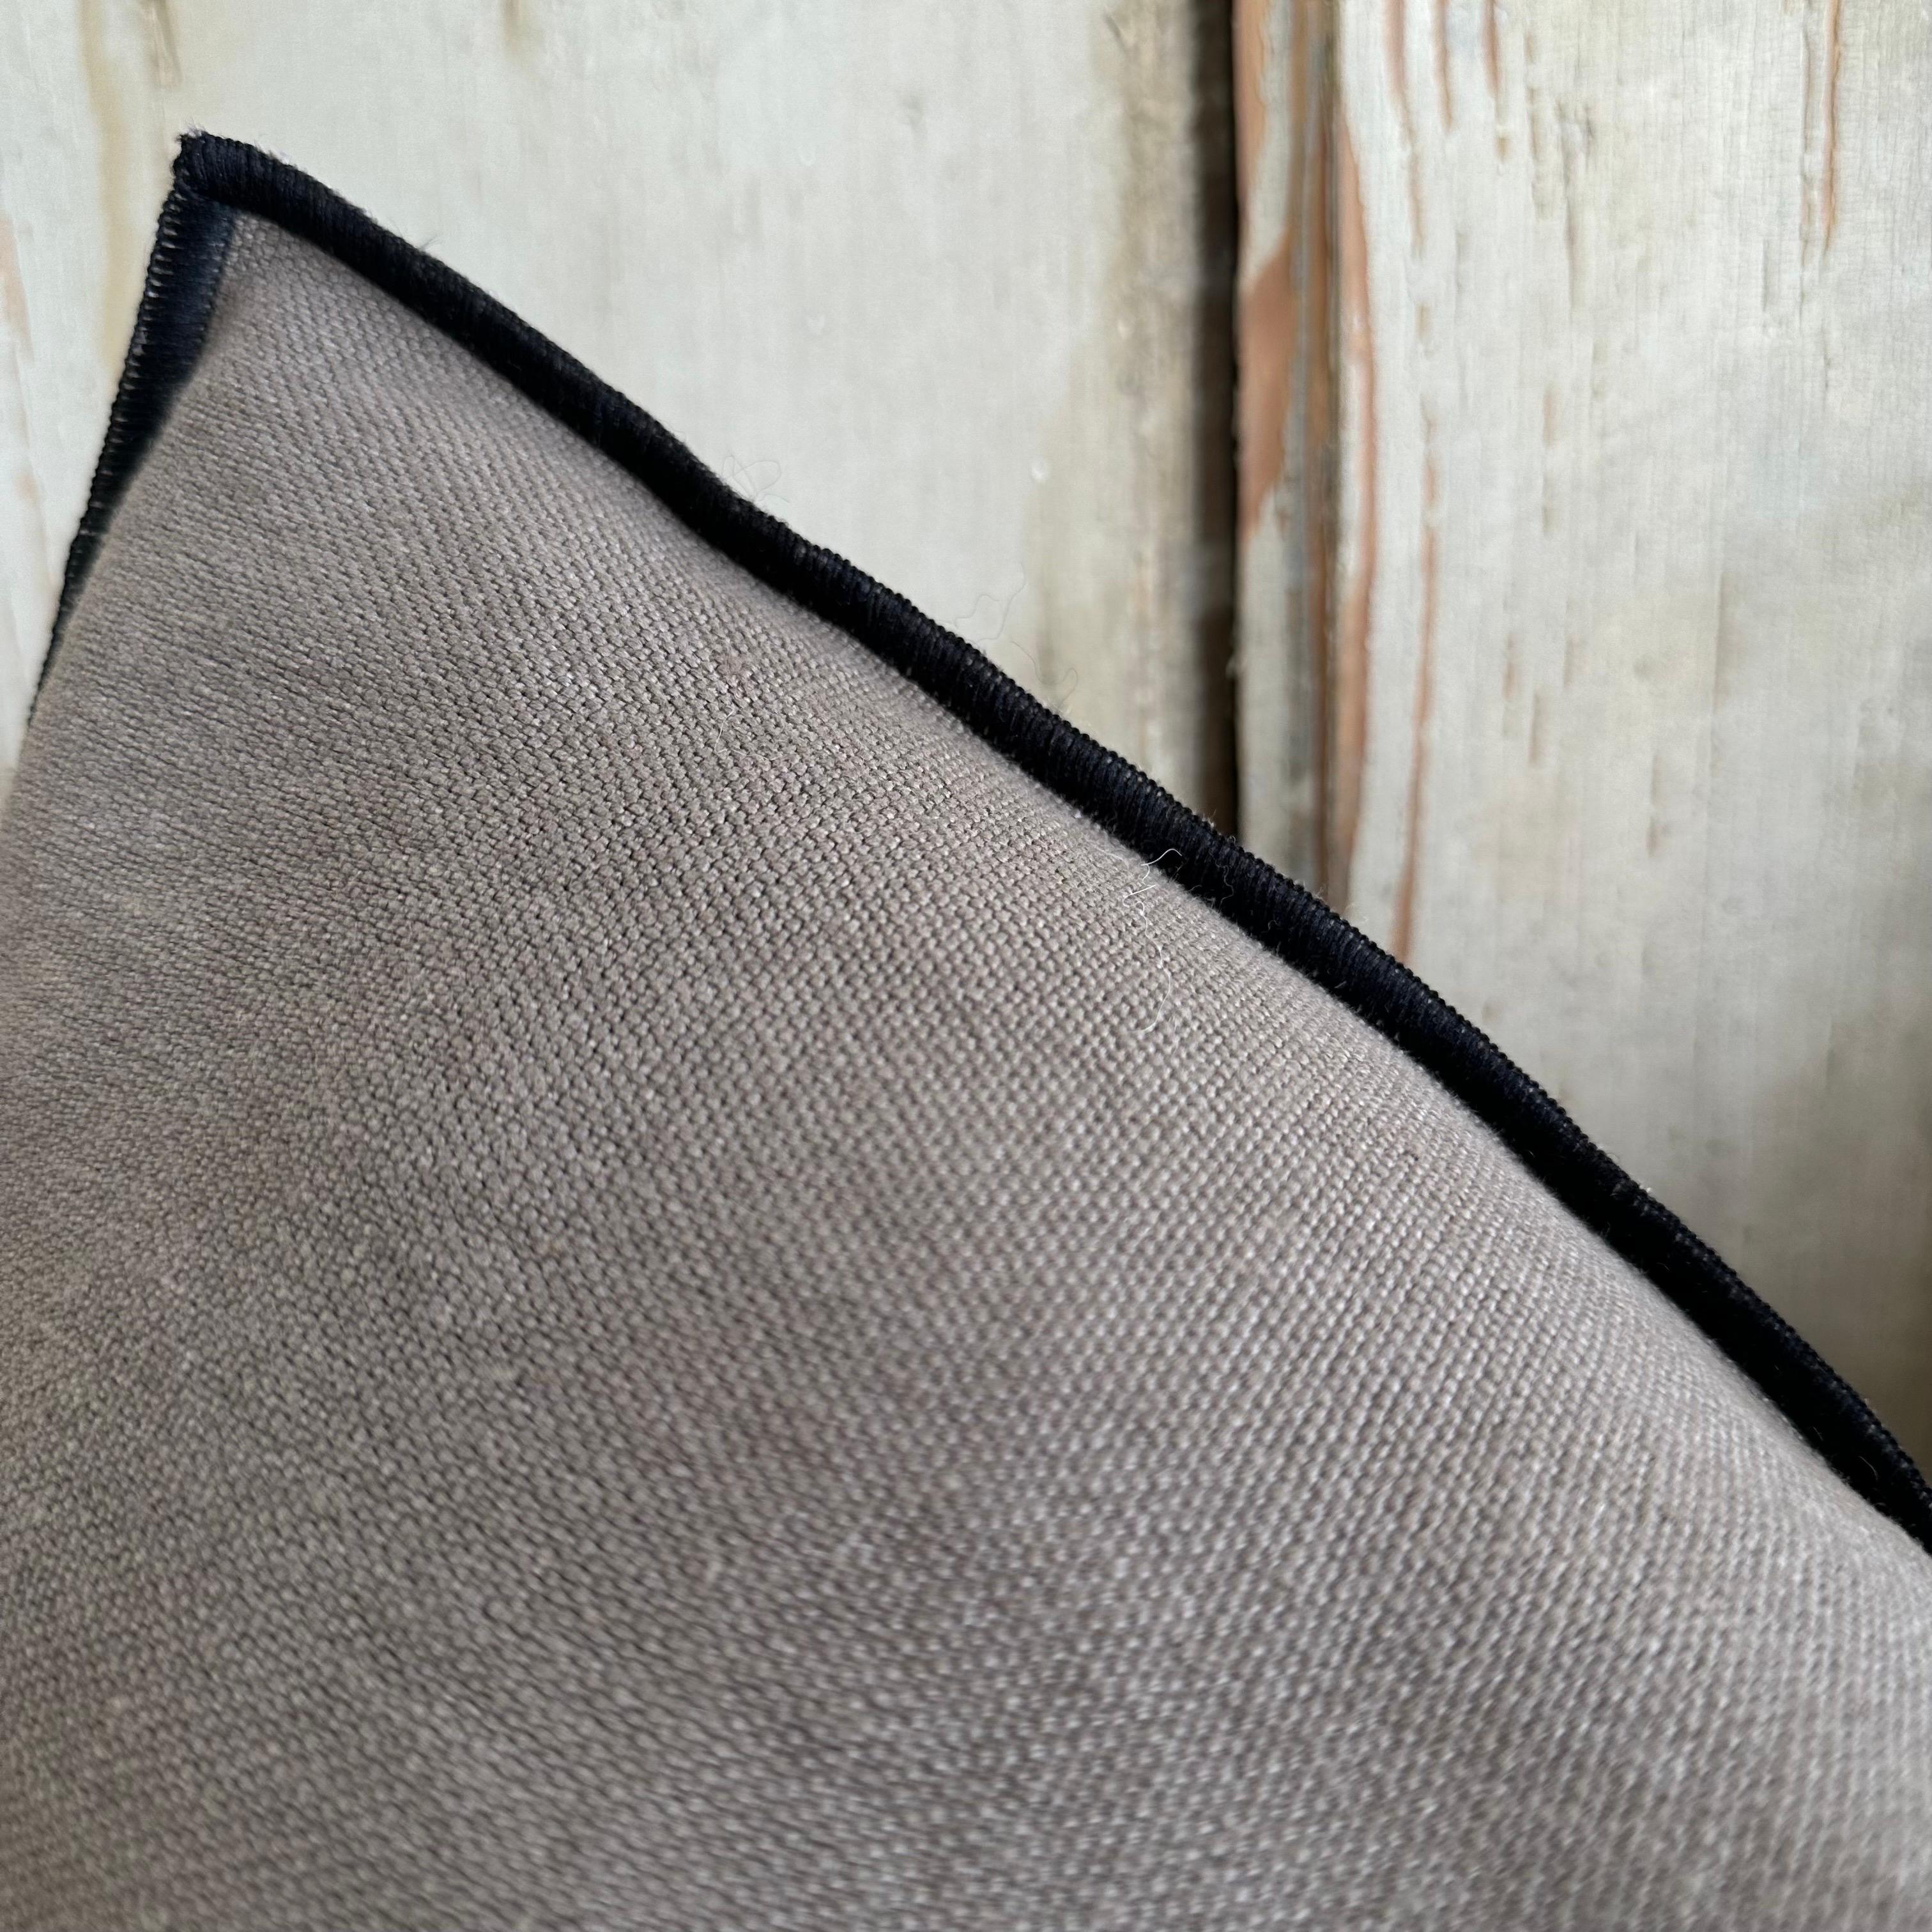 Stone Washed French Linen Accent Pillow in Ecorce In New Condition For Sale In Brea, CA